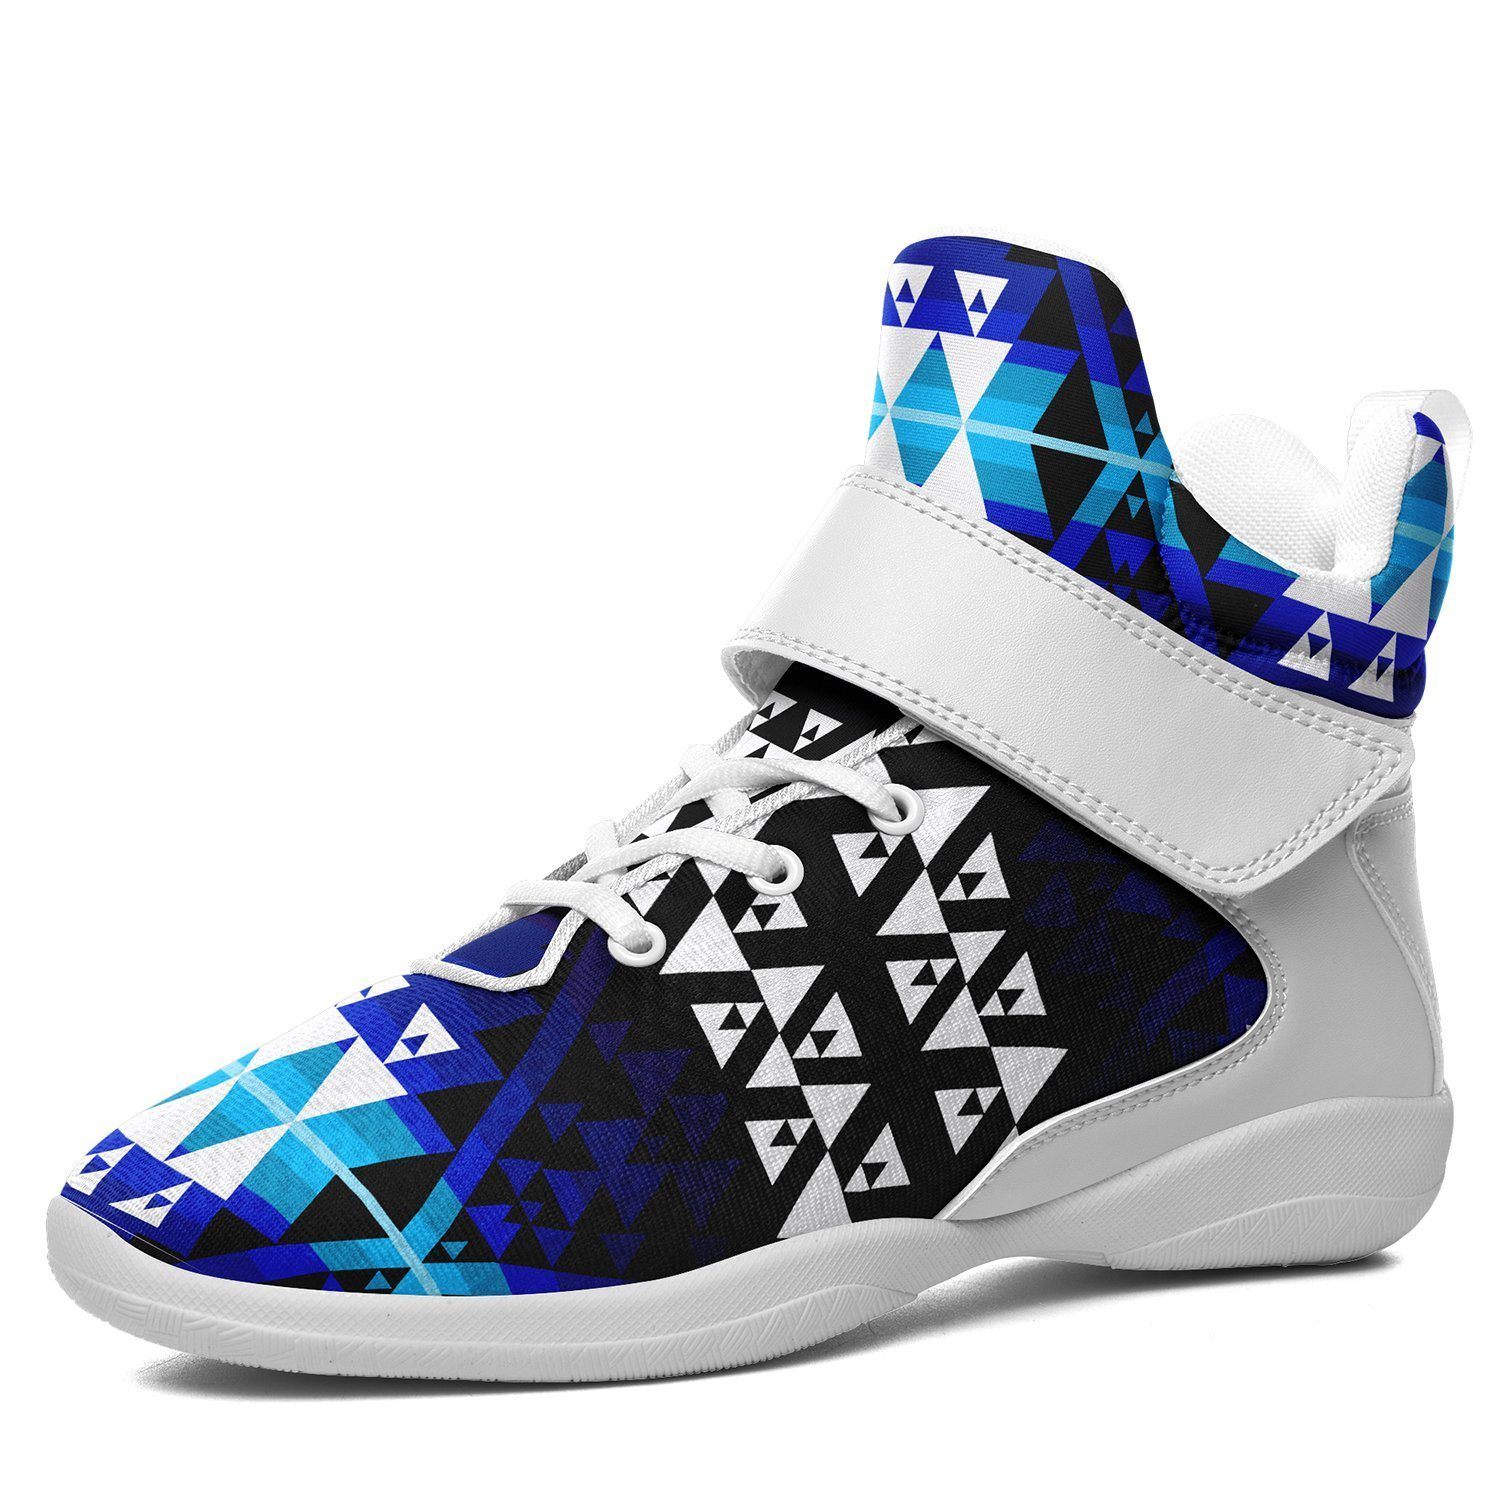 Writing on Stone Night Watch Ipottaa Basketball / Sport High Top Shoes - White Sole 49 Dzine US Men 7 / EUR 40 White Sole with White Strap 